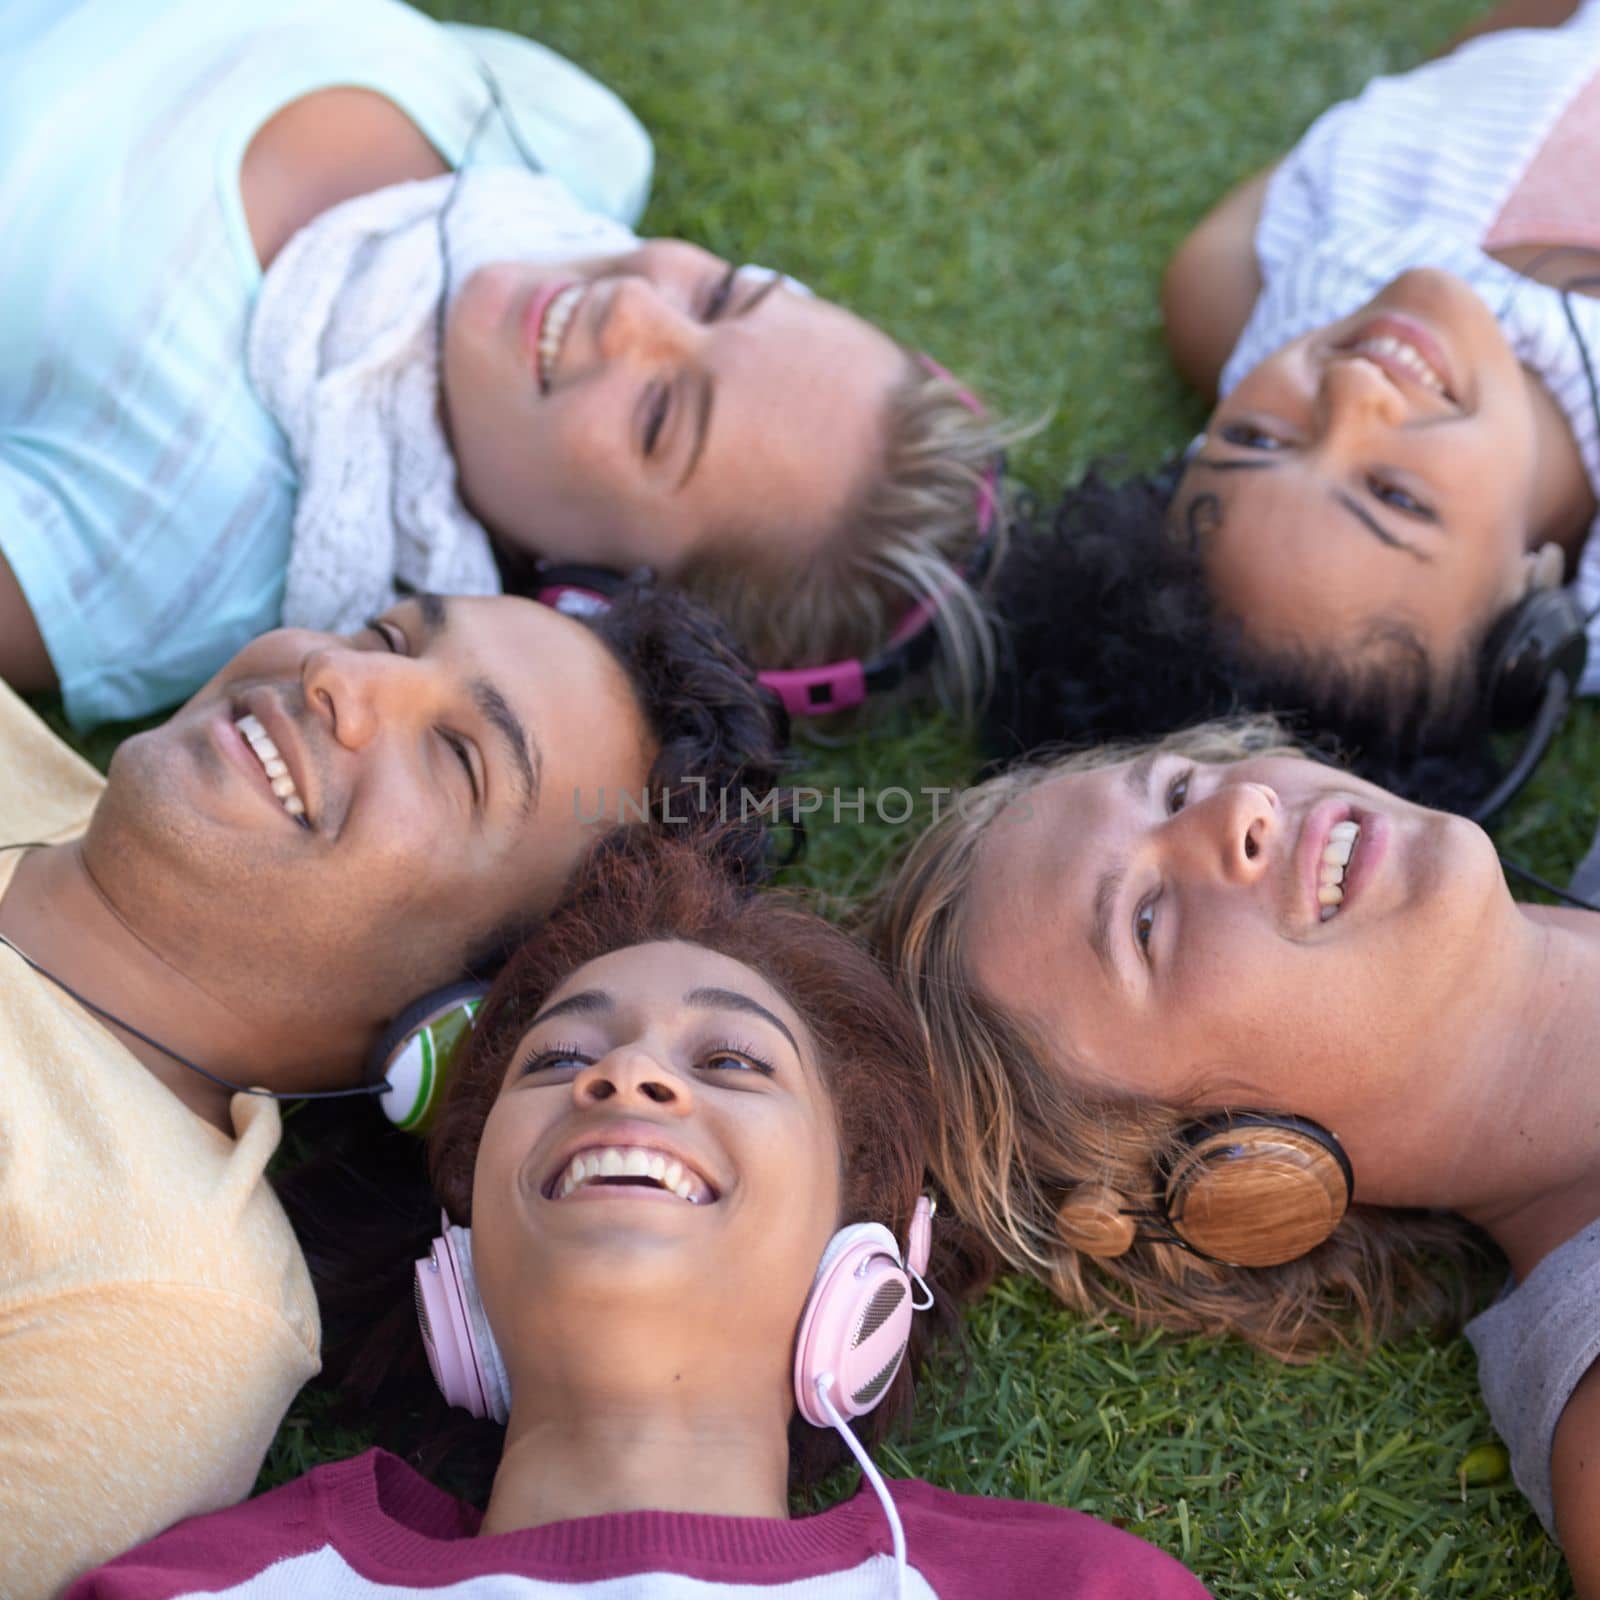 Sharing our love of music. A group of young students lying on the grass and listening to music